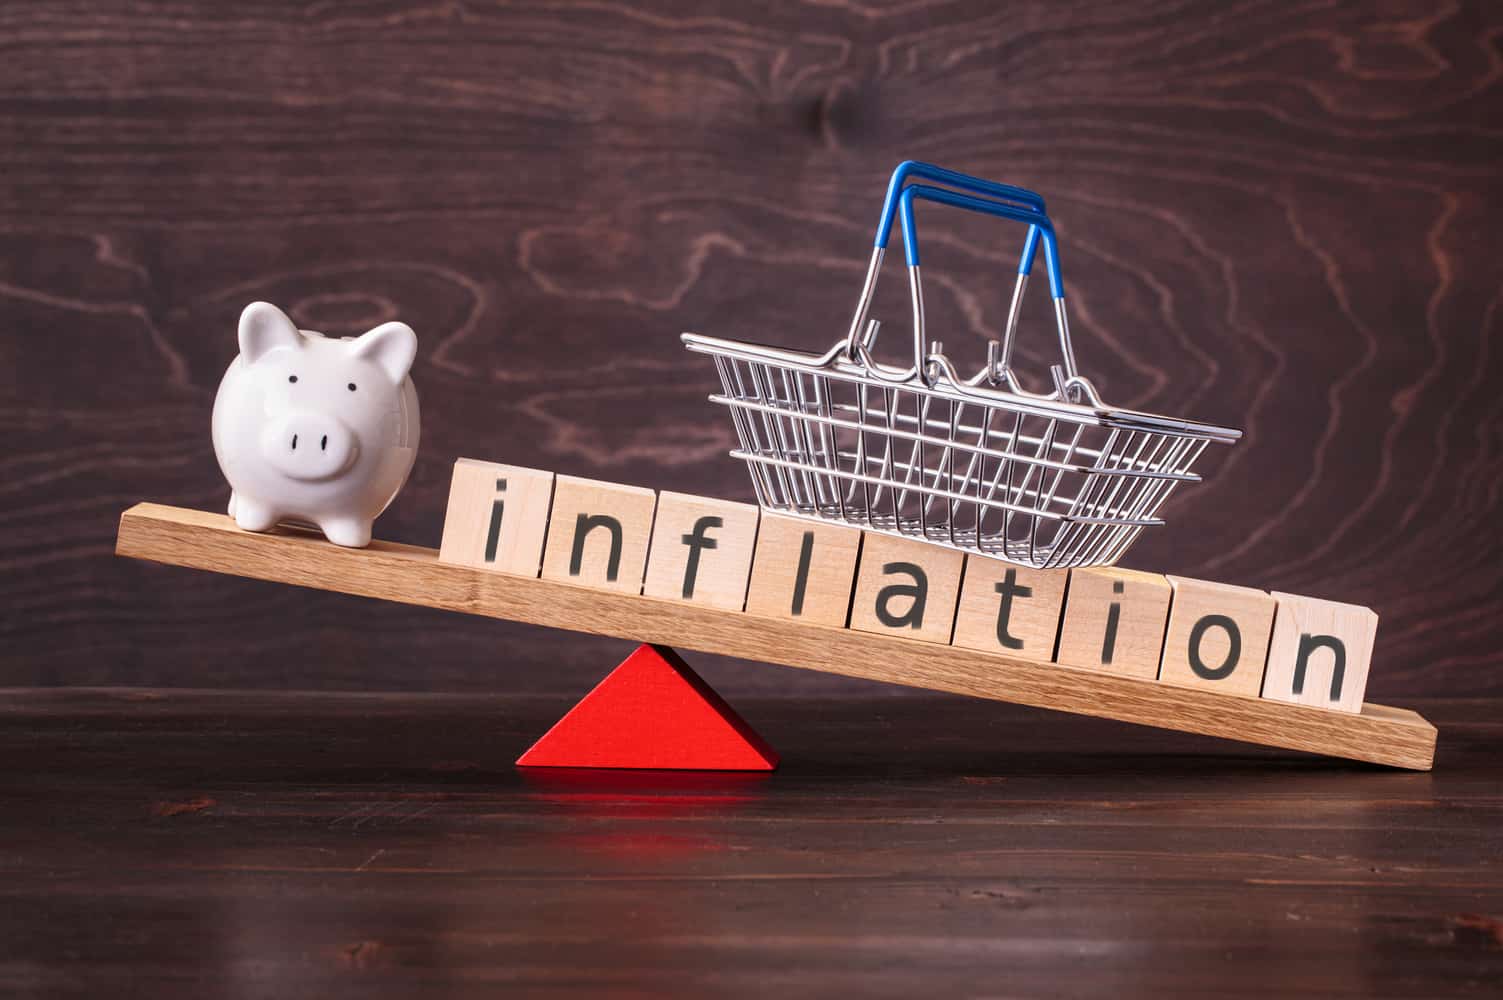 Inflation rate decreased